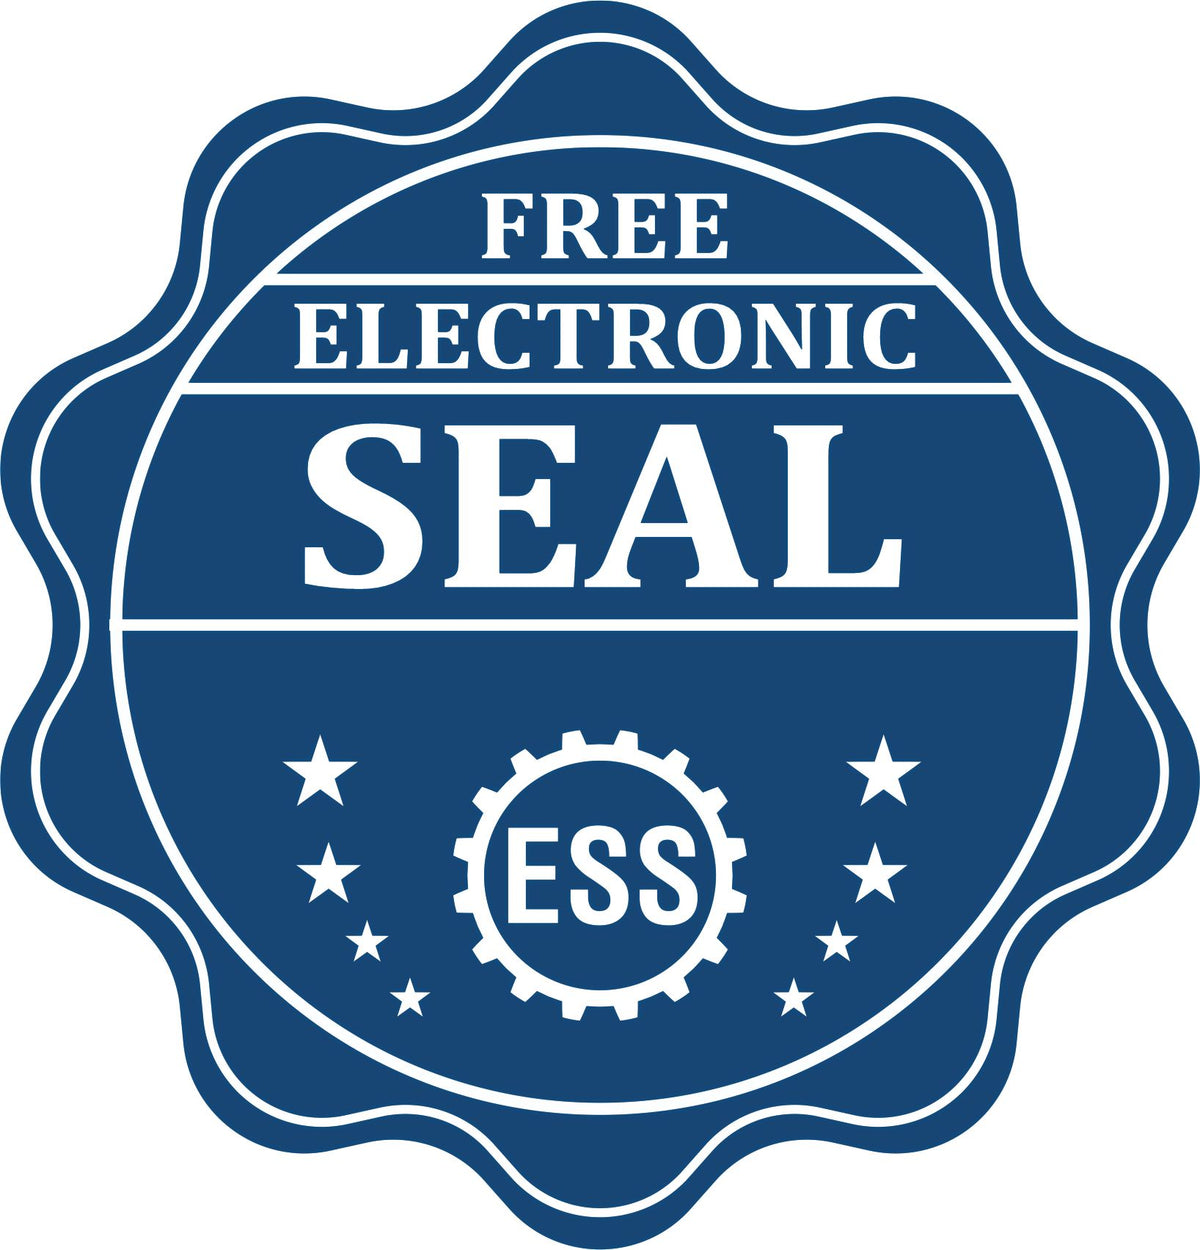 A badge showing a free electronic seal for the MaxLight Premium Pre-Inked Virginia State Seal Notarial Stamp with stars and the ESS gear on the emblem.